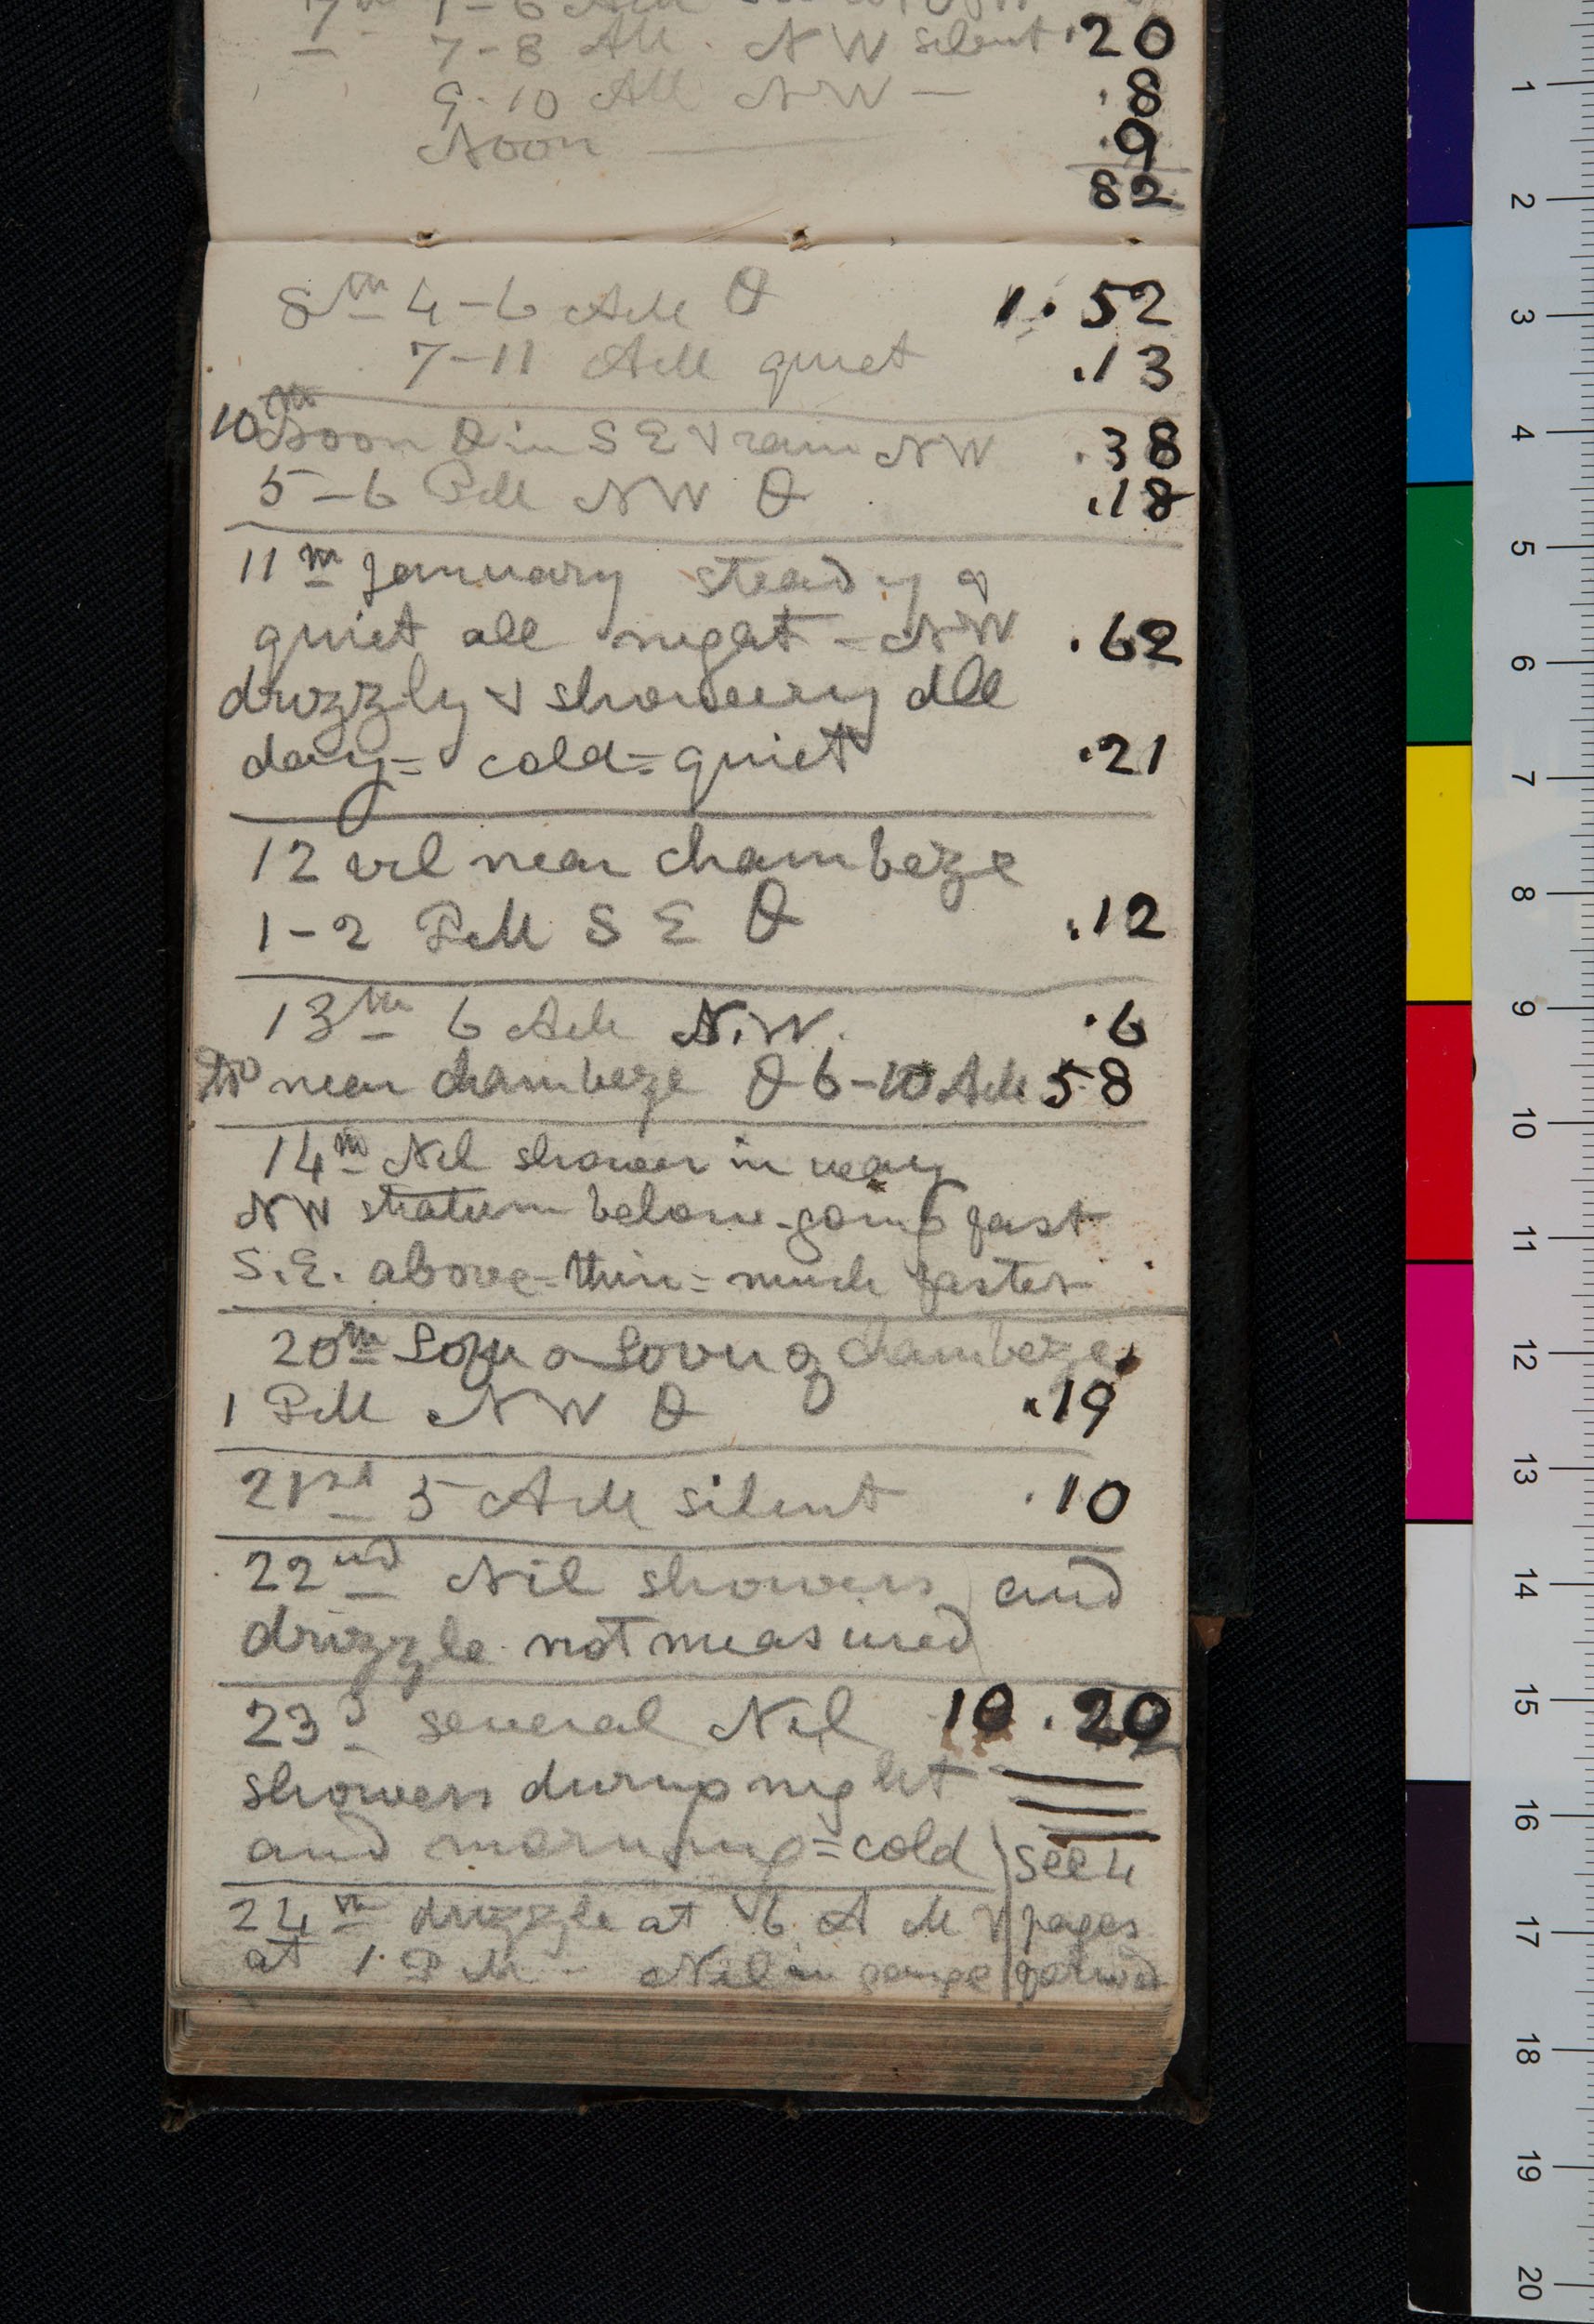 An image of a page of Field Diary XVI (Livingstone 1872h:[172]). Copyright David Livingstone Centre. Creative Commons Attribution-NonCommercial 3.0 Unported (https://creativecommons.org/licenses/by-nc/3.0/).